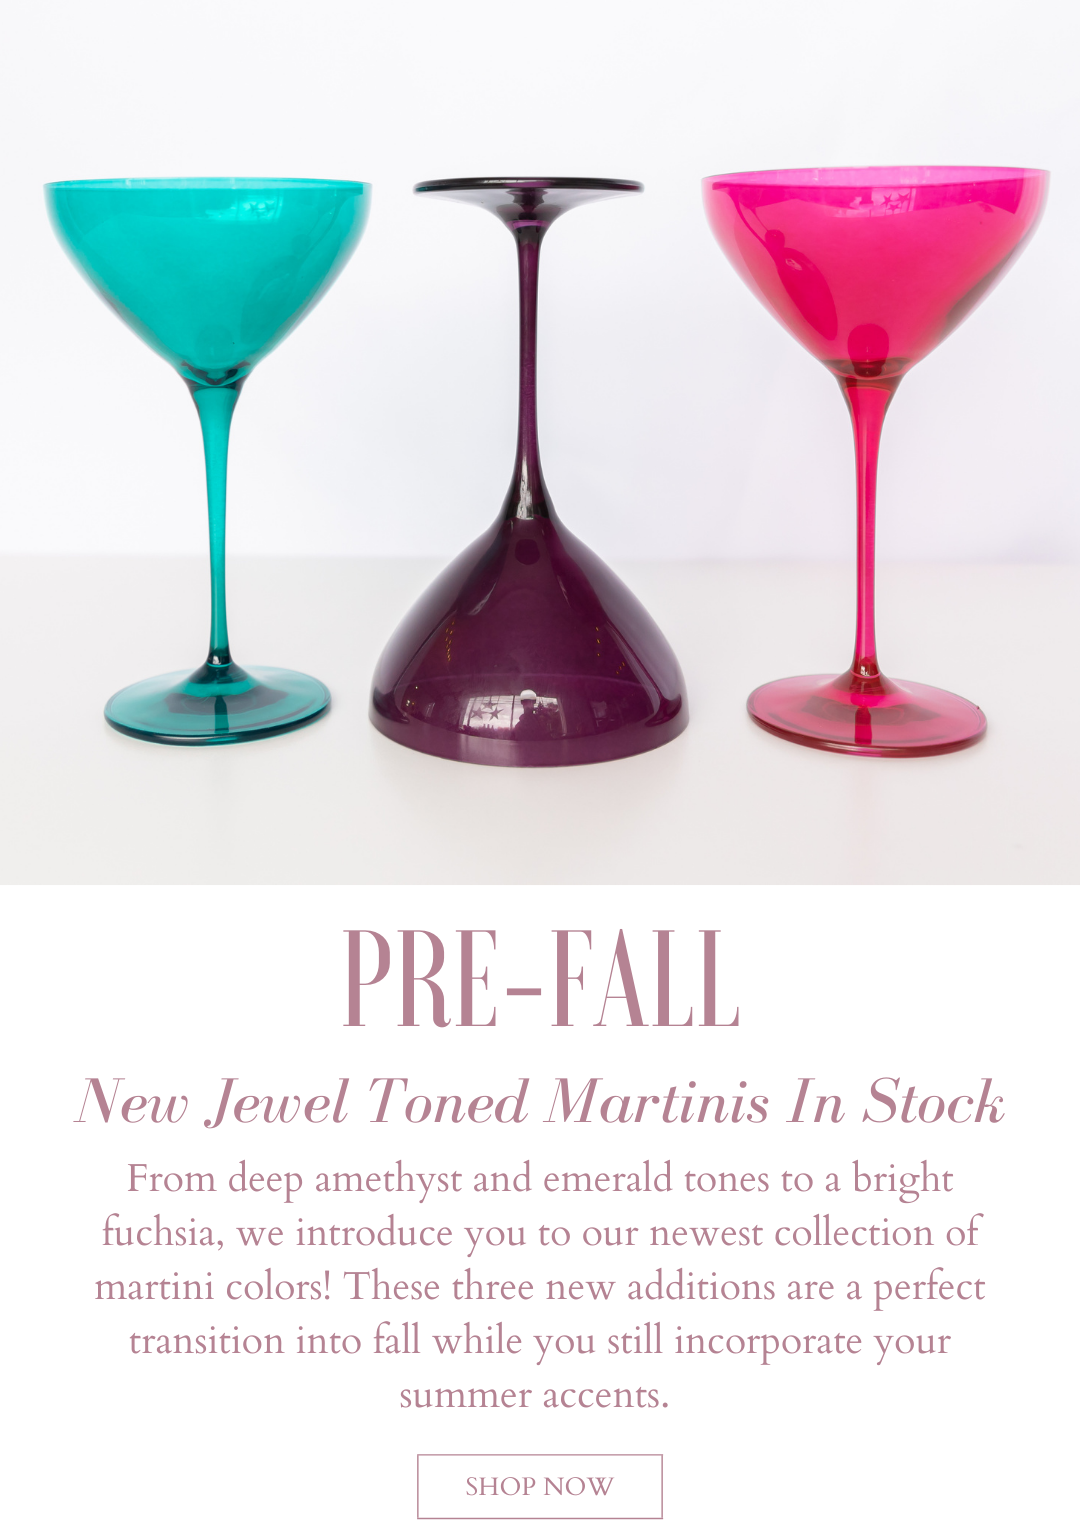 Pre-Fall: New Jewel Toned Martinis In Stock